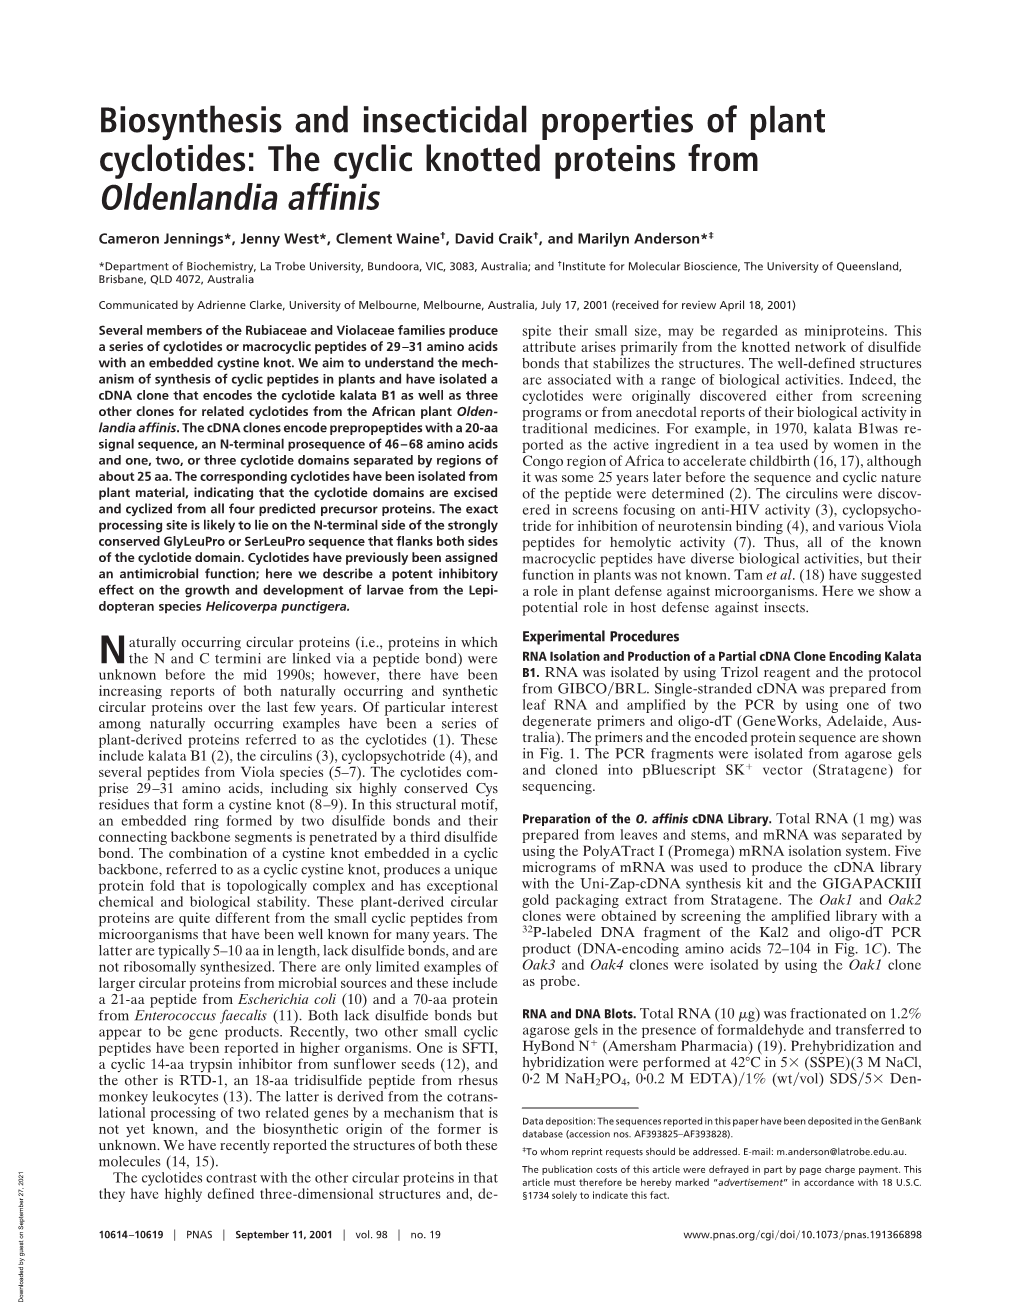 Biosynthesis and Insecticidal Properties of Plant Cyclotides: the Cyclic Knotted Proteins from Oldenlandia Affinis